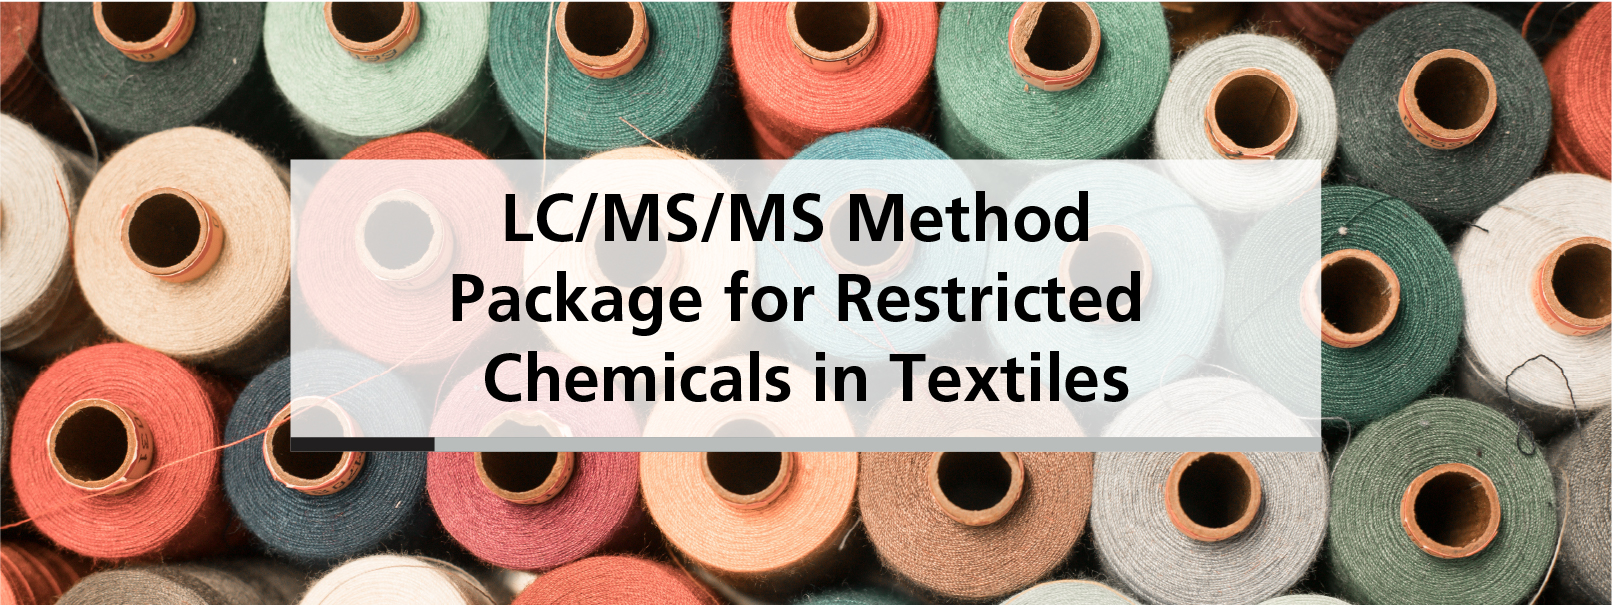 LC/MS/MS Method Package for Restricted Chemicals in Textiles